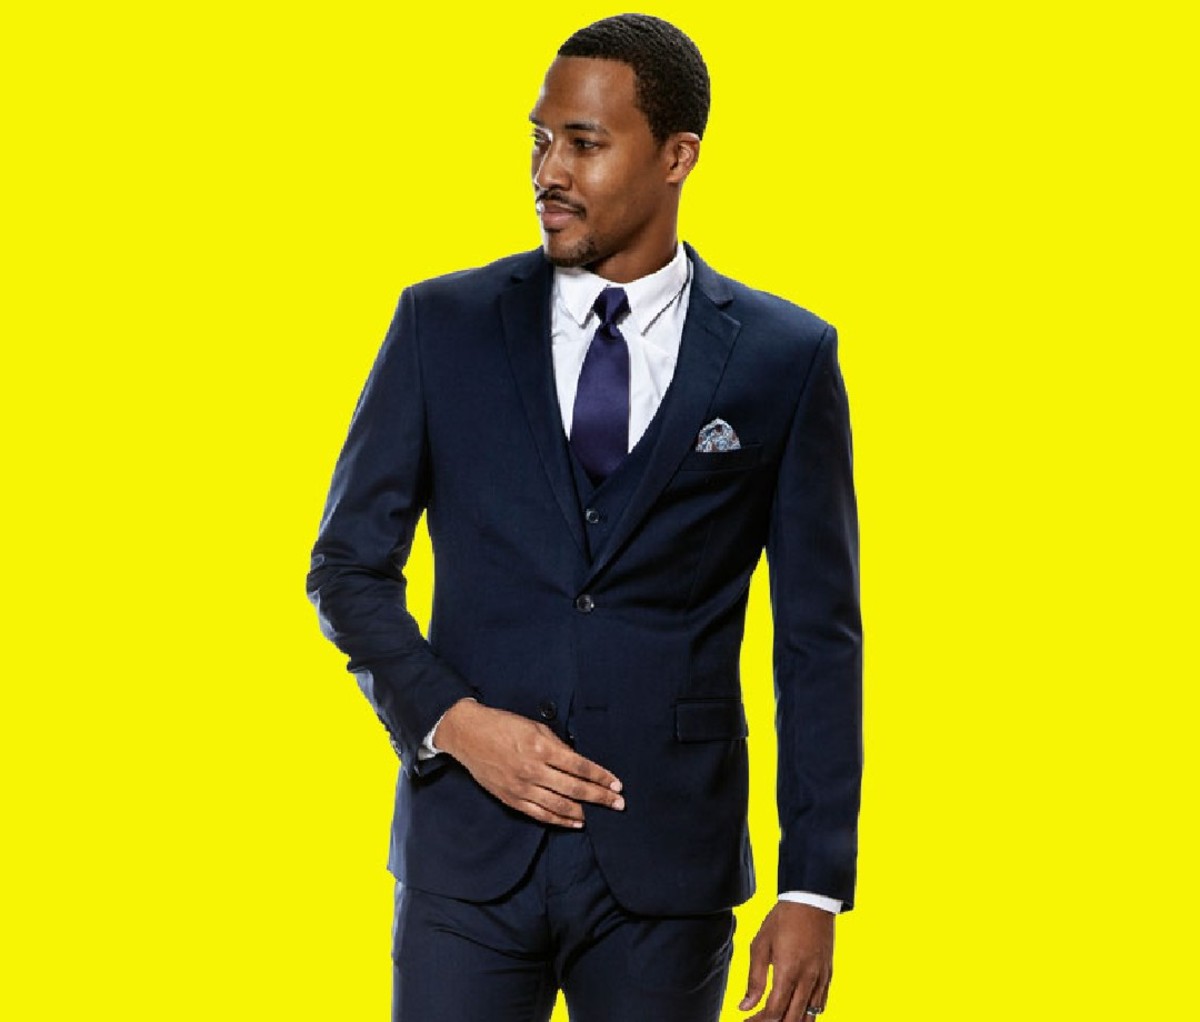 Black man wearing tux against bright yellow backdrop